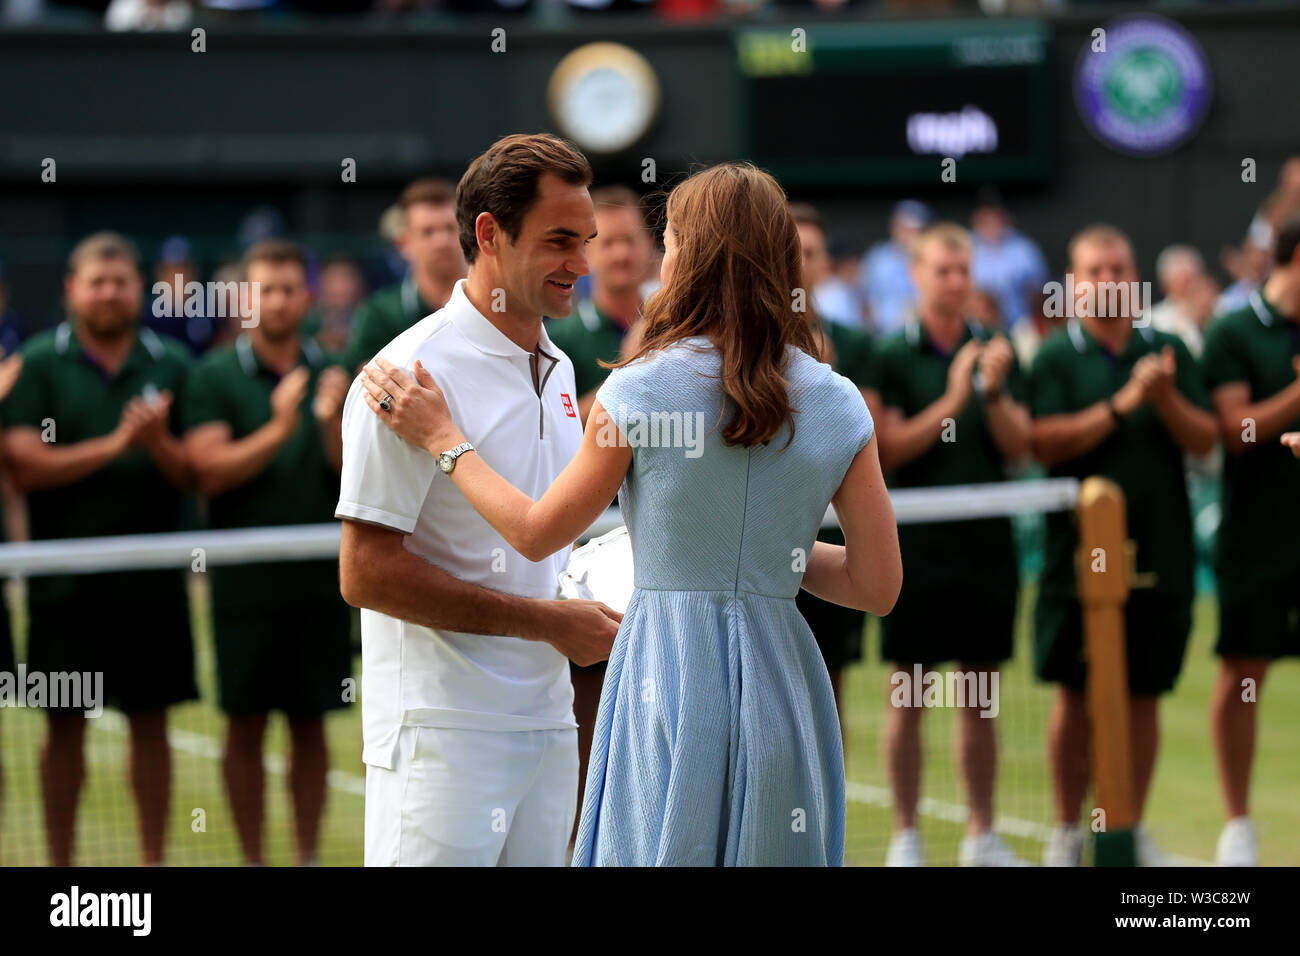 Roger Federer is presented the runners up trophy by the Duchess of  Cambridge after defeat to Novak Djokovic in the mens singles final on day  thirteen of the Wimbledon Championships at the